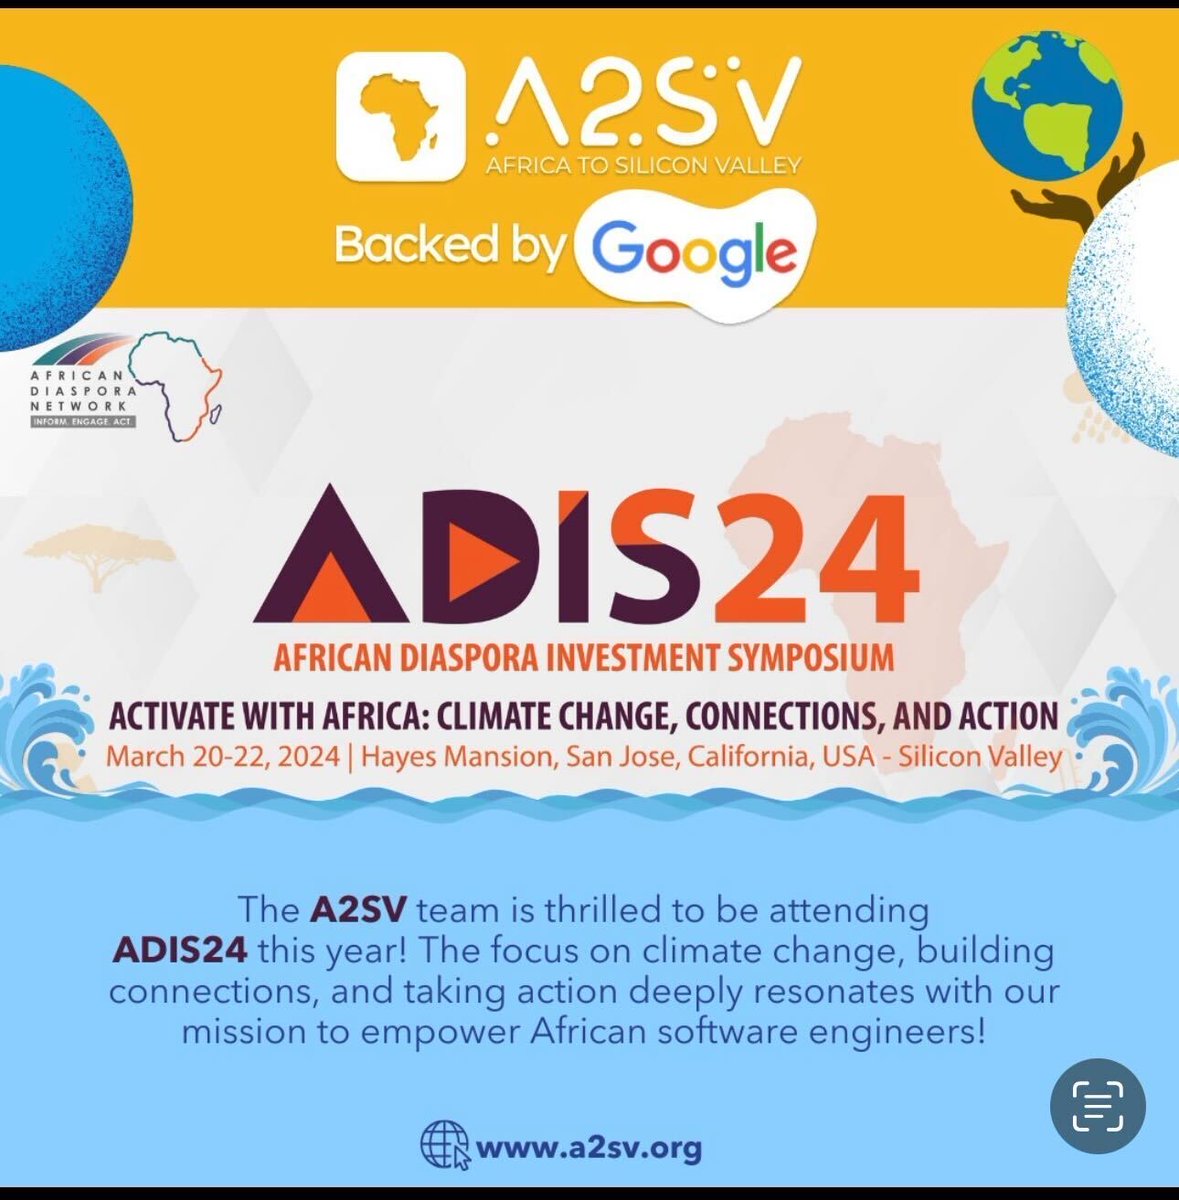 We are looking forward to the African #Diaspora Investment Symposium this week, and connecting with and learning from those involved in the continent and the diaspora.

#ADISymposium #Africa #ClimateAction #ActivatingChange

Thanks for organizing @AfricanDNetwork!